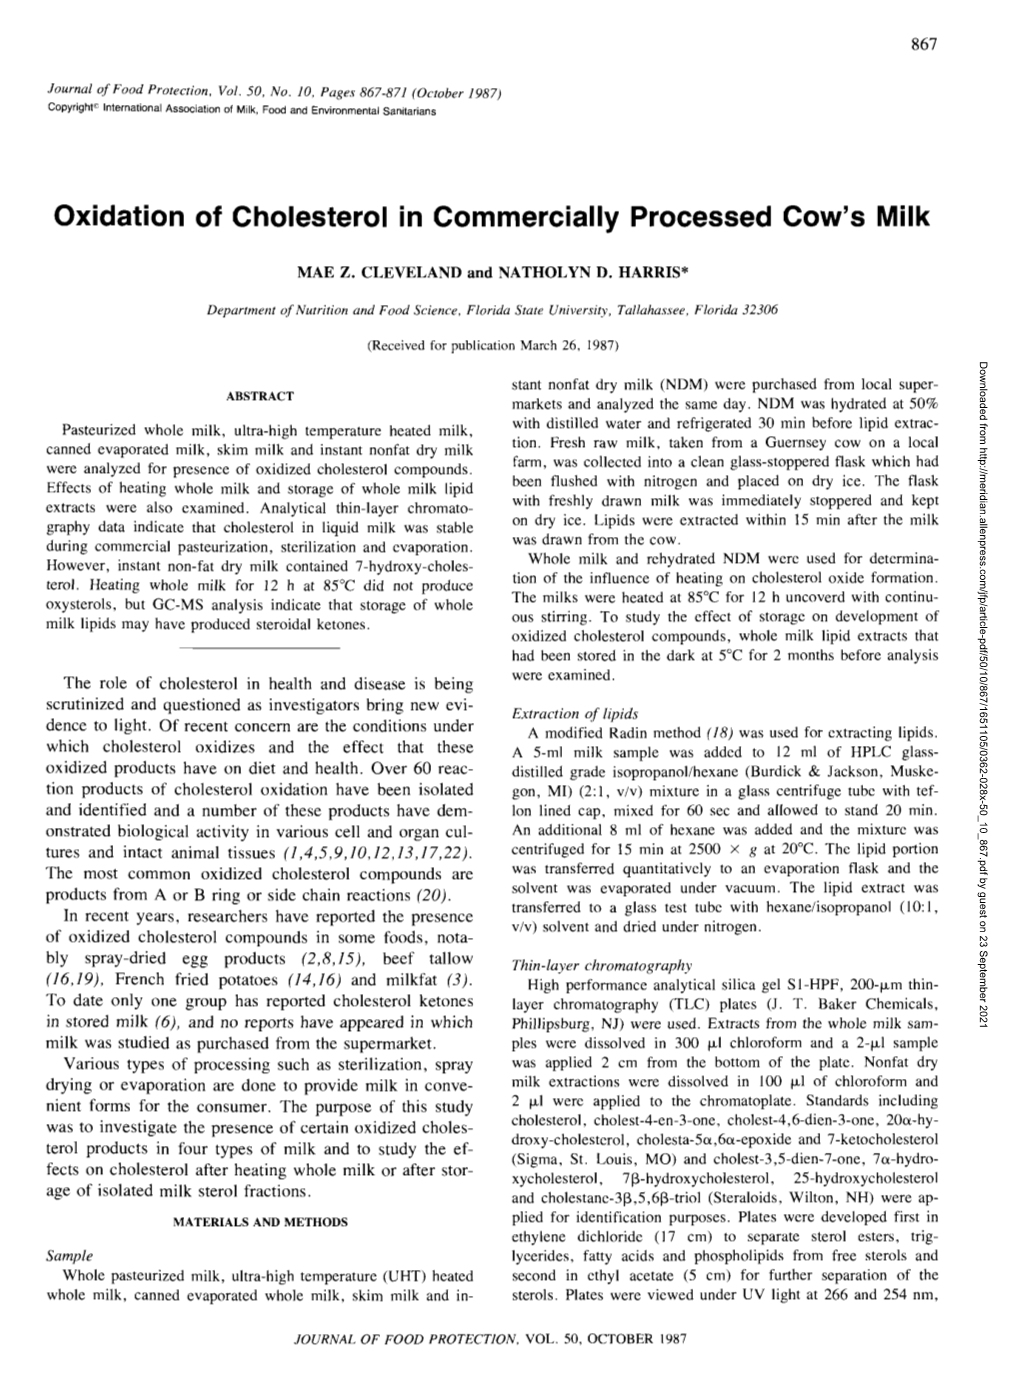 Oxidation of Cholesterol in Commercially Processed Cow's Milk